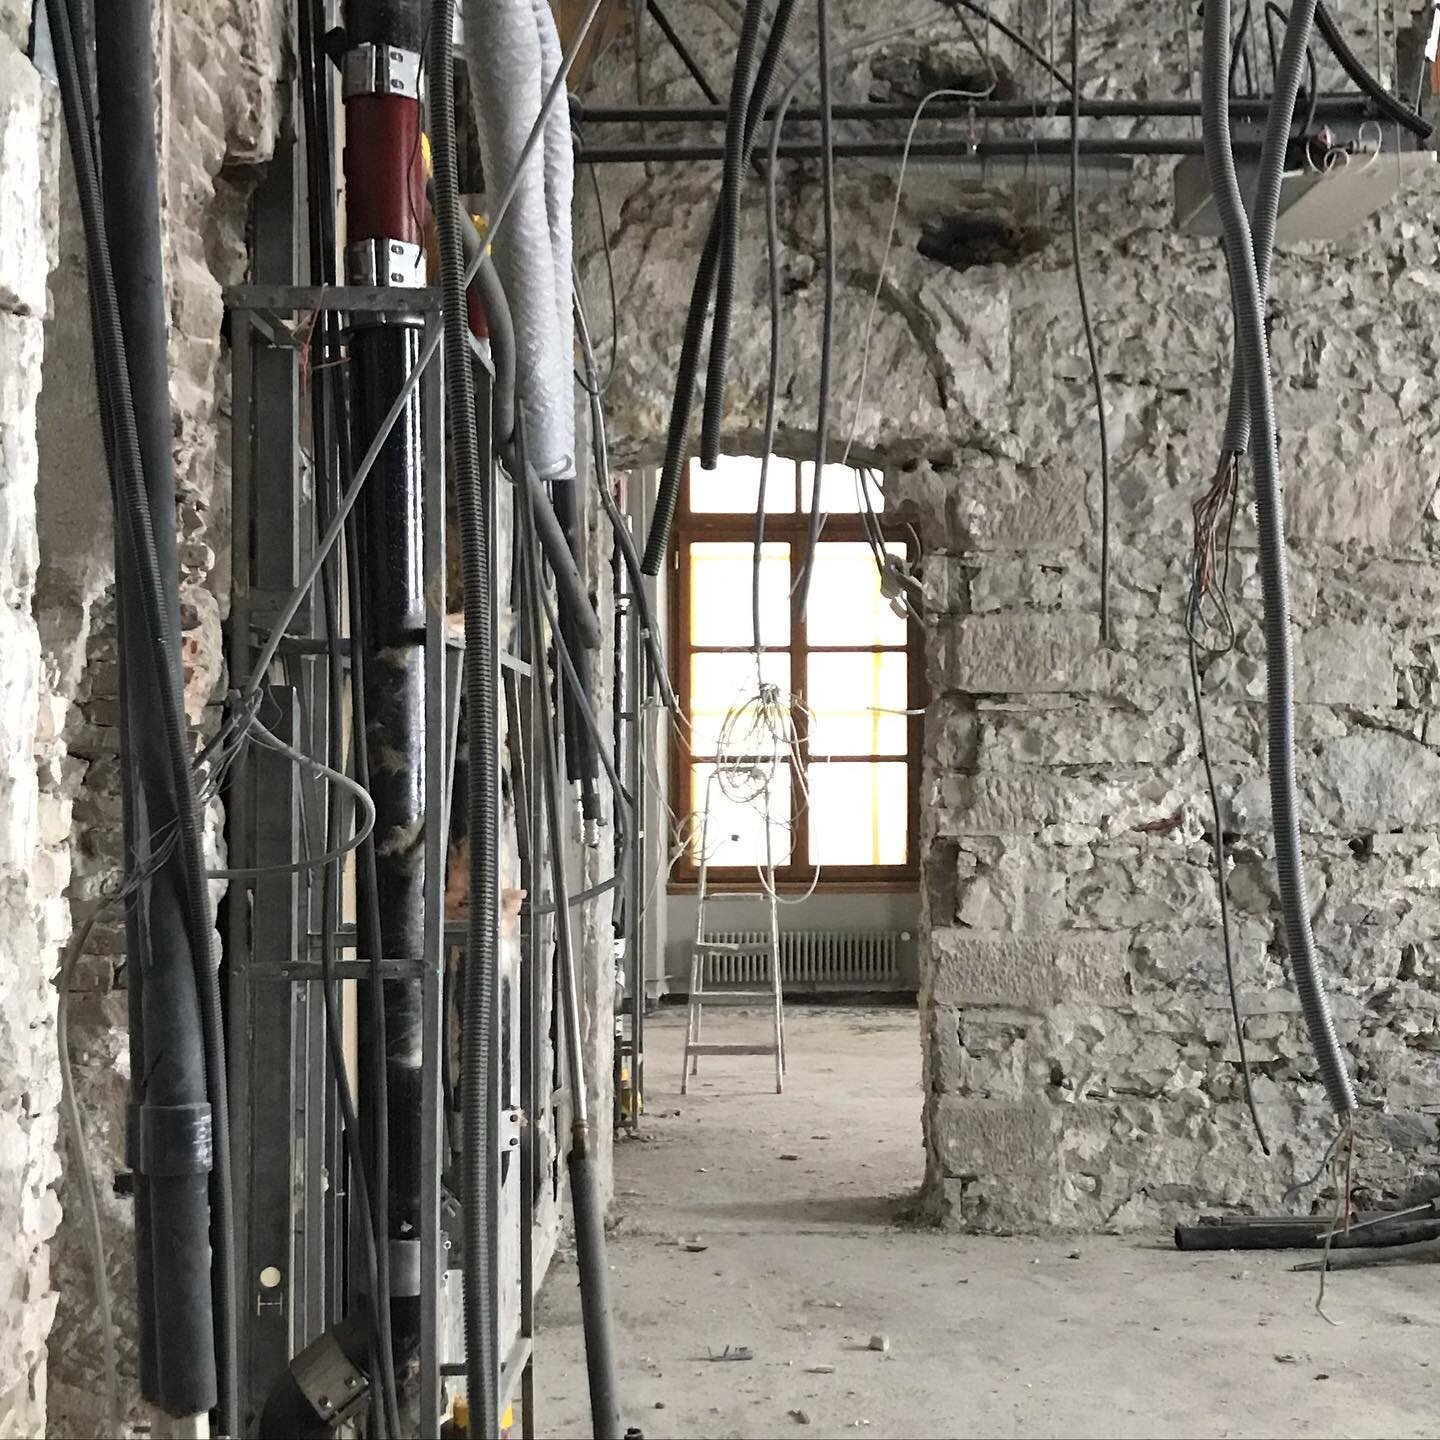 There&rsquo;s no turning back now!
The main strip out begins on the renovation of this grand old hotel in Geneva, The Metropole. #5starhotel #geneva #renovation #historicbuildings